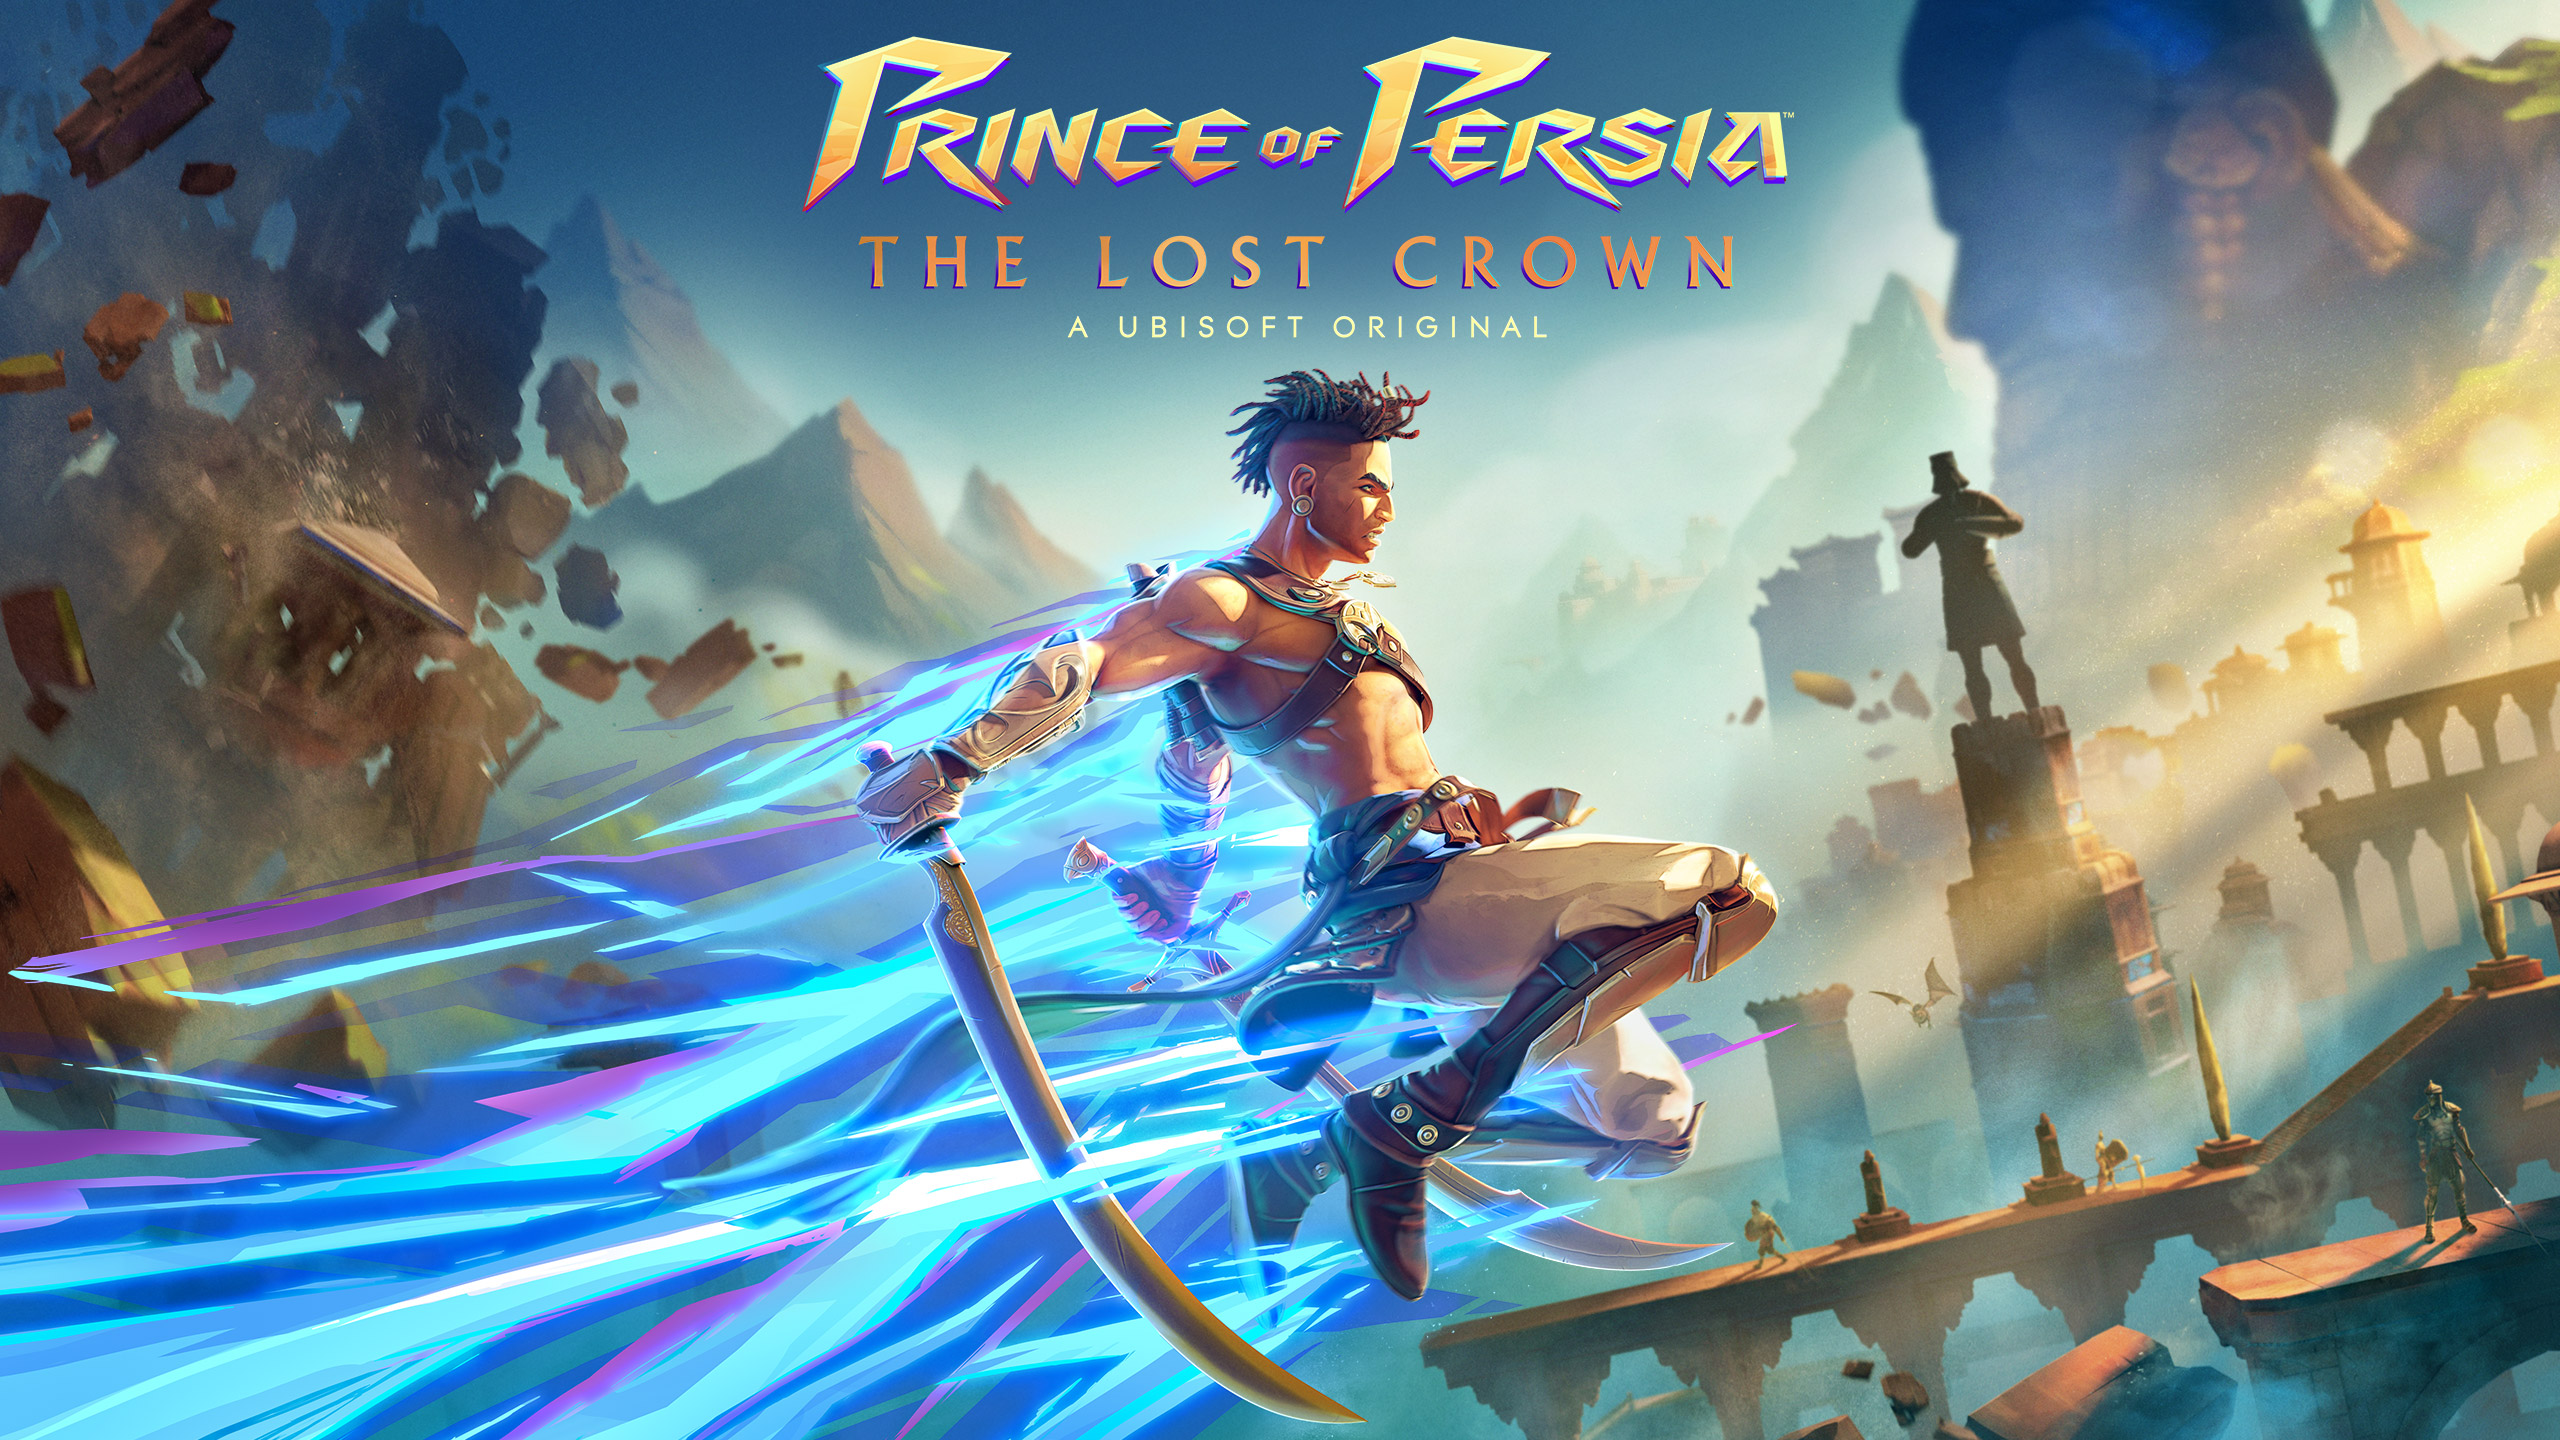 Prince of Persia: The Lost Crown – Recenzia (Hra)